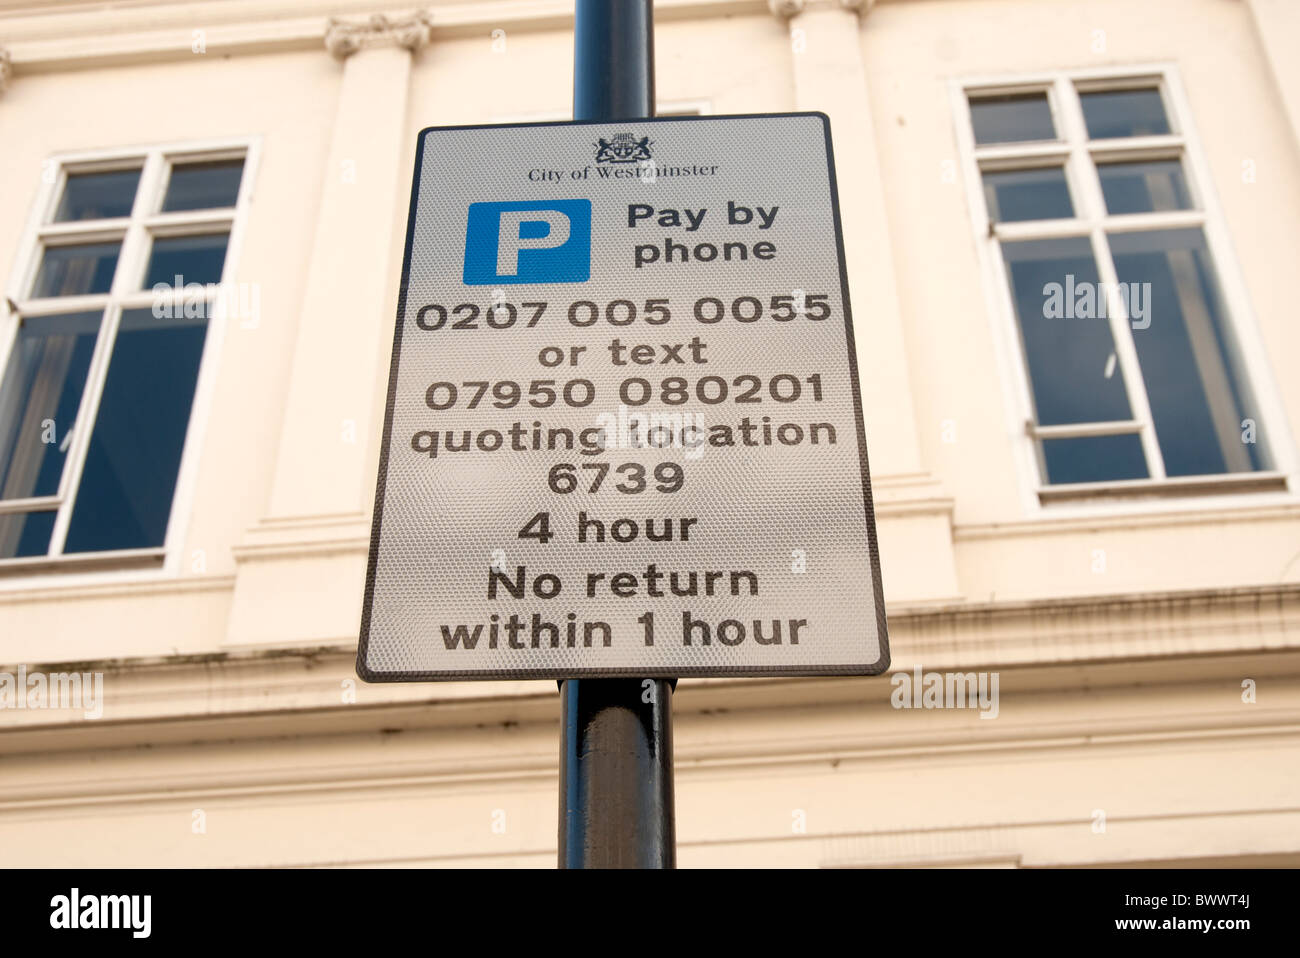 pay and display parking sign with telephone number Stock Photo